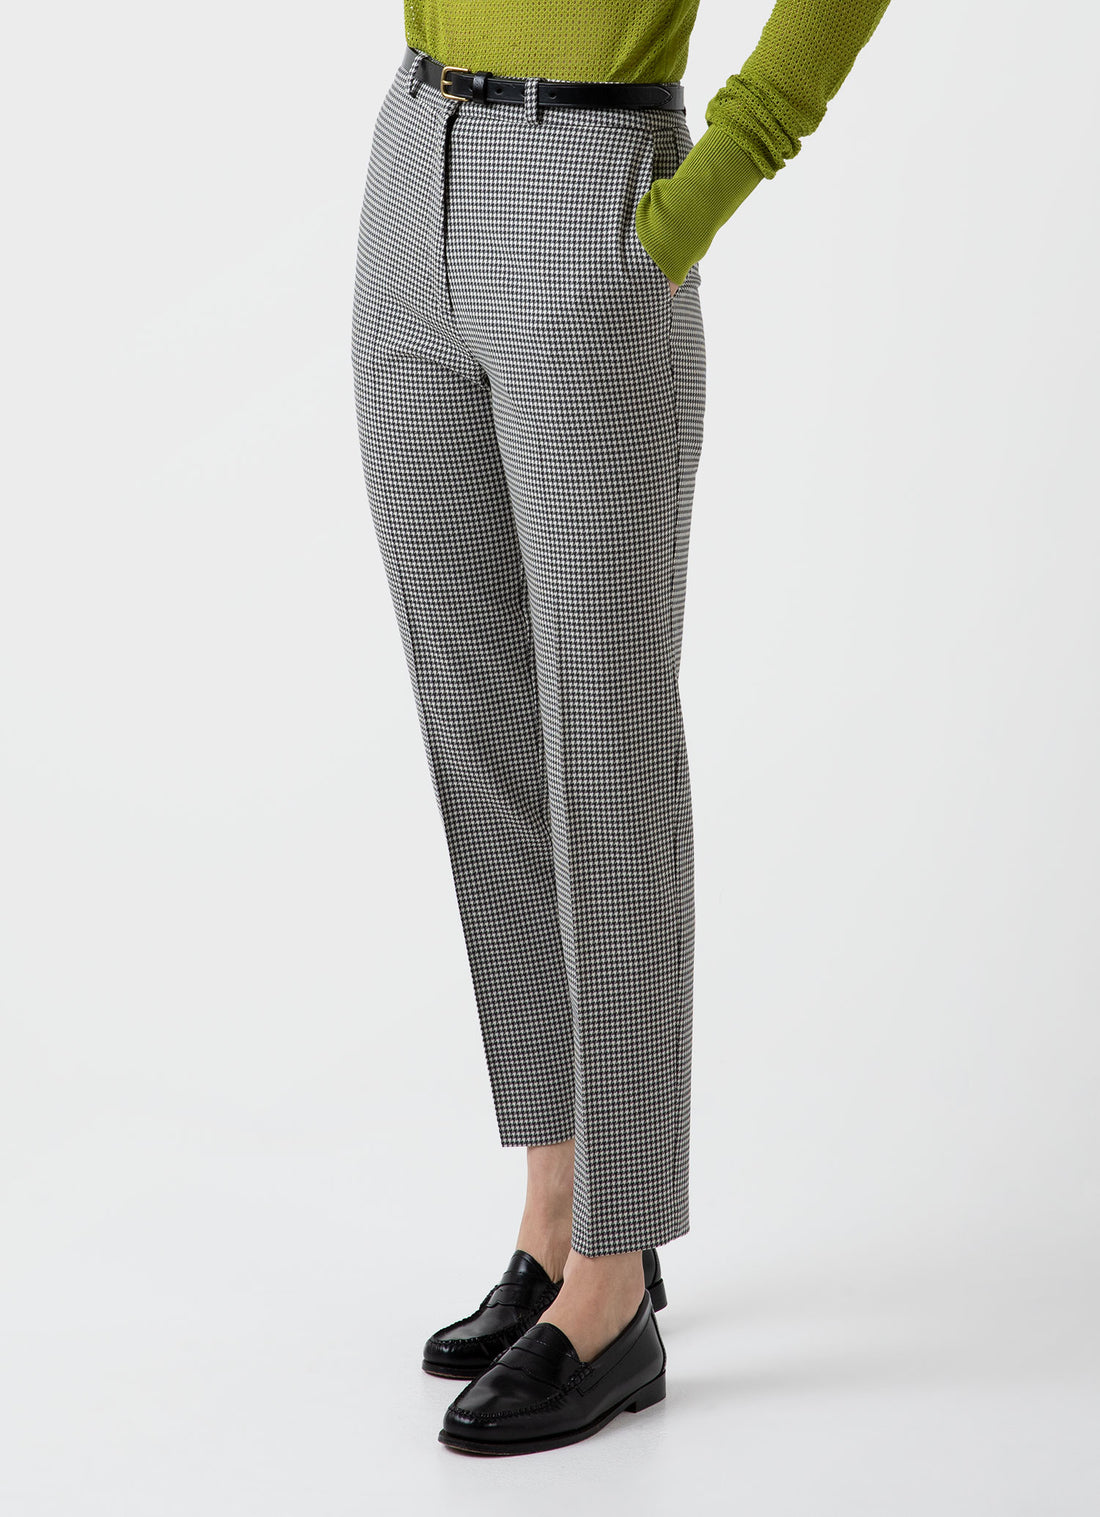 Women's Edie Campbell Tapered Trouser in Black/Ecru Check